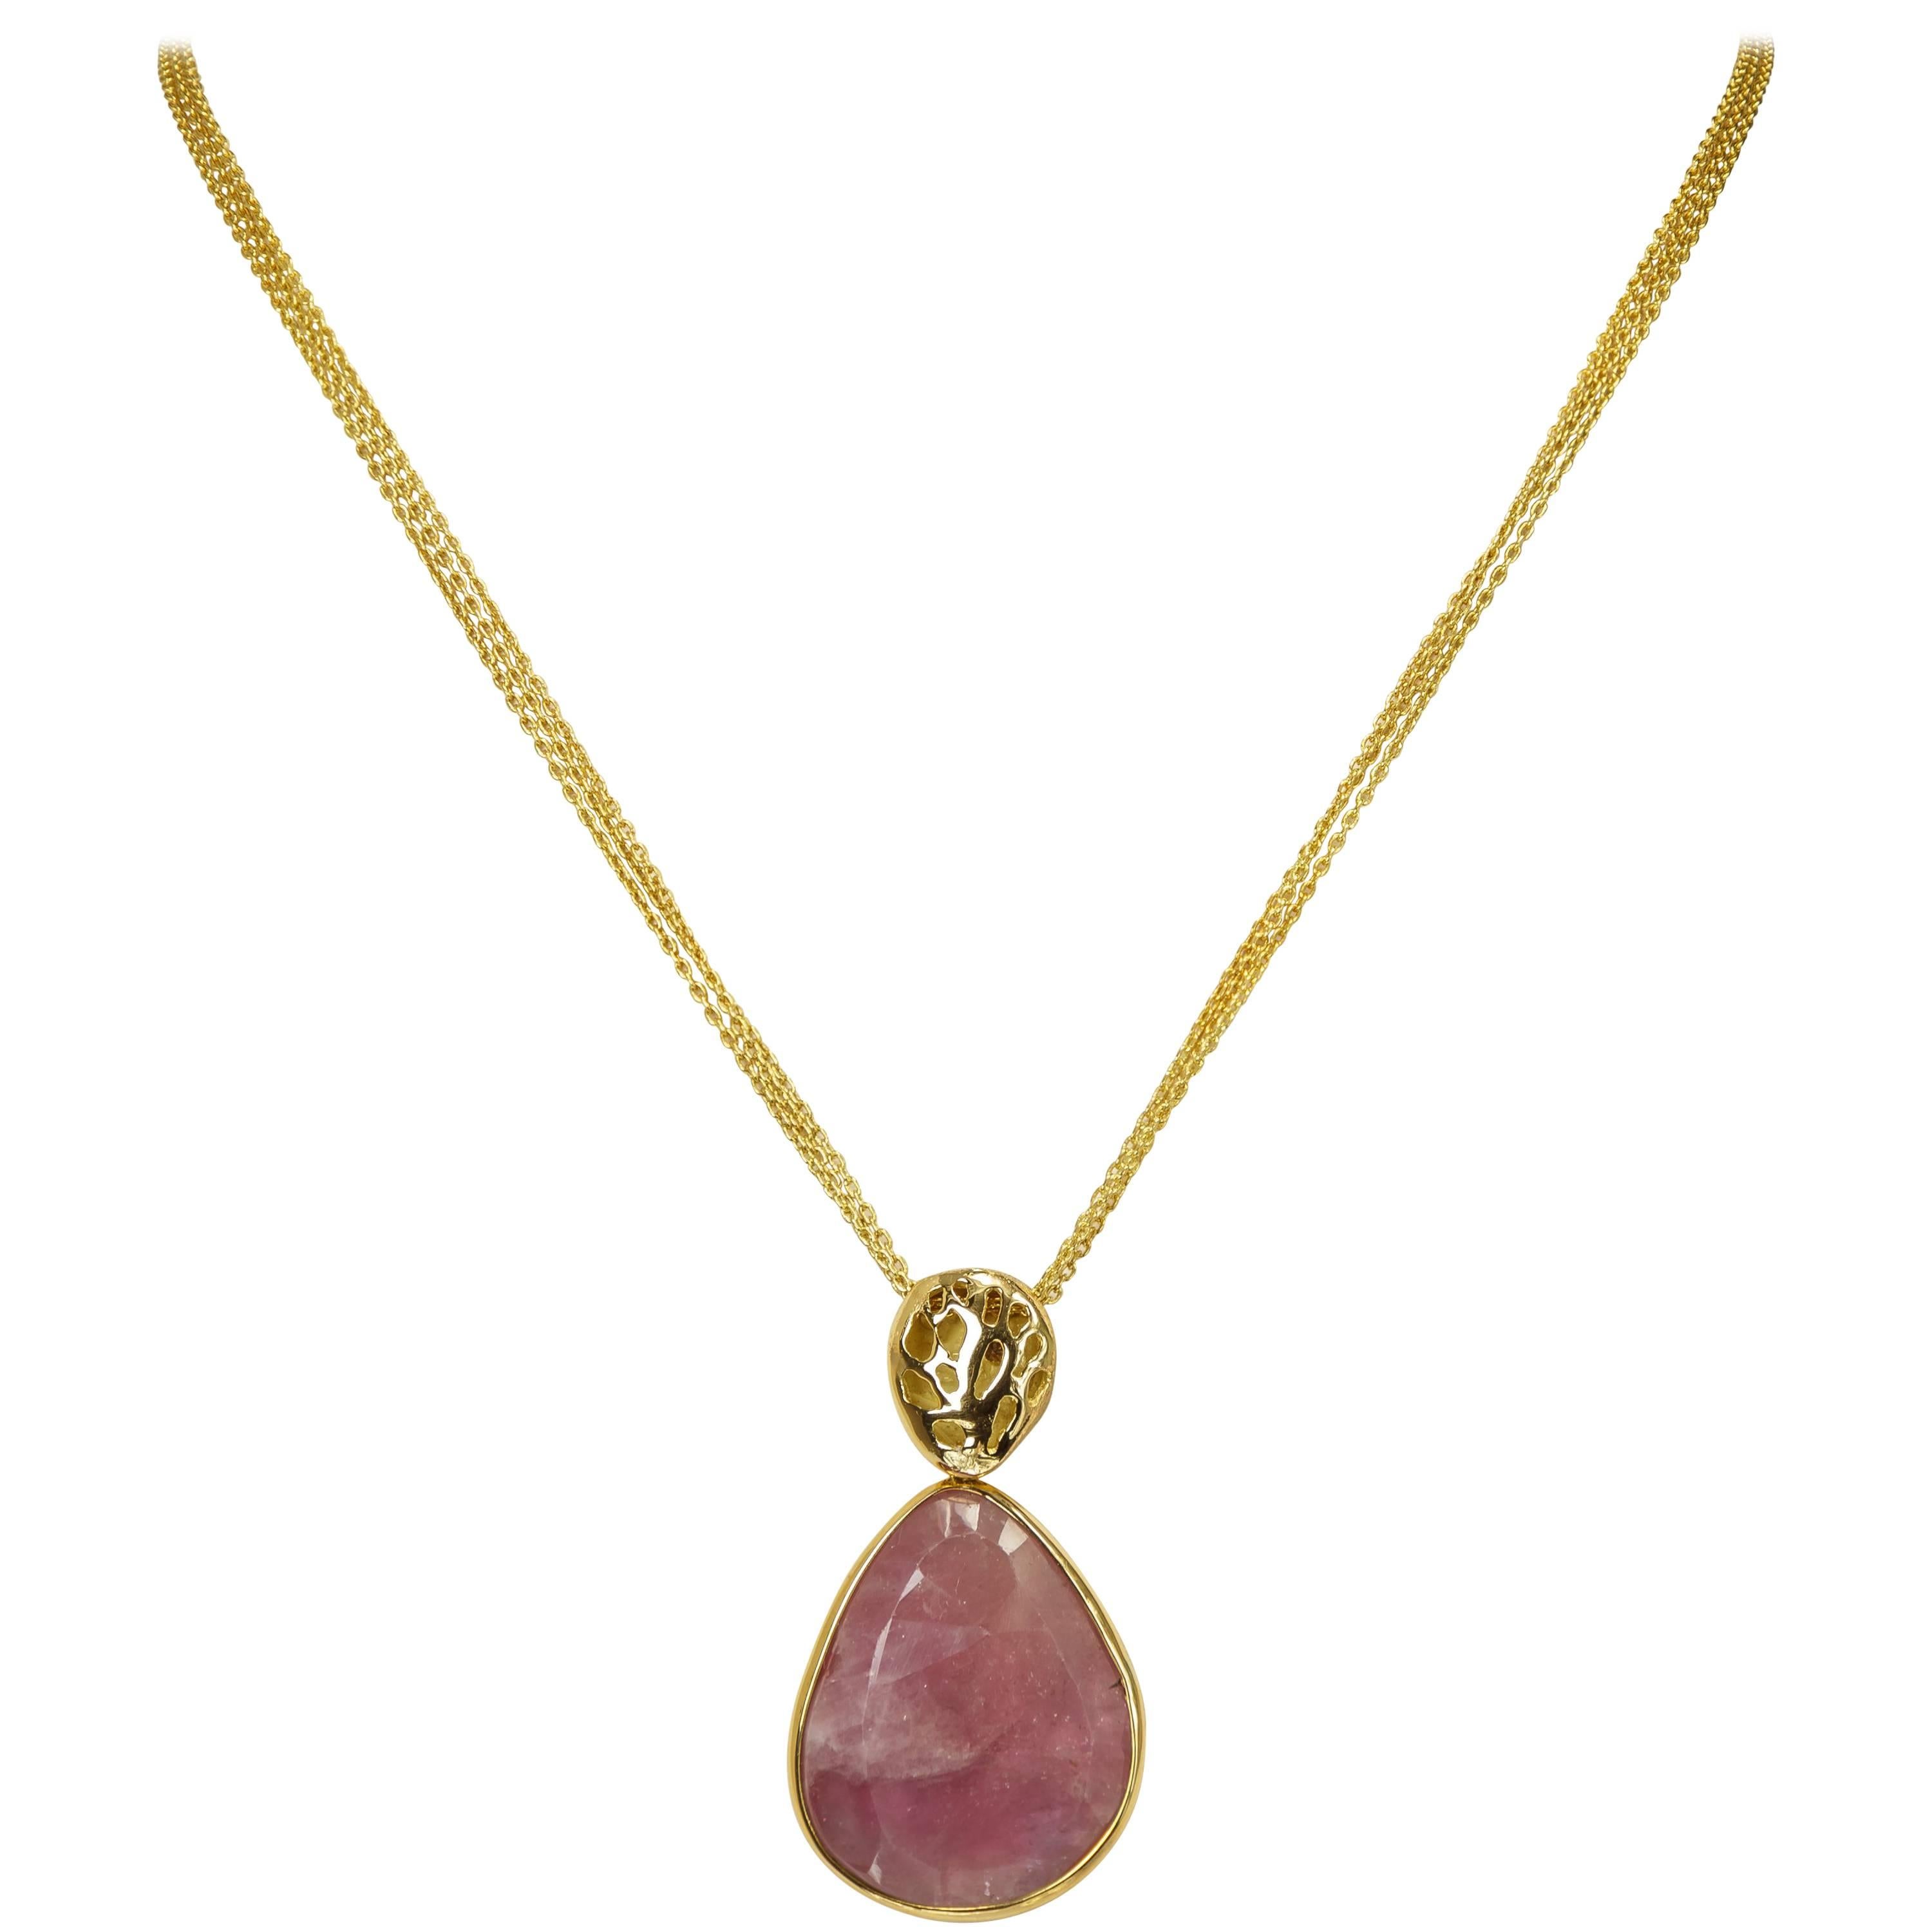 Yvel Natural Colored Sapphire Pendant Necklace 18 Karat Yellow Gold  29.50 Carat For Sale